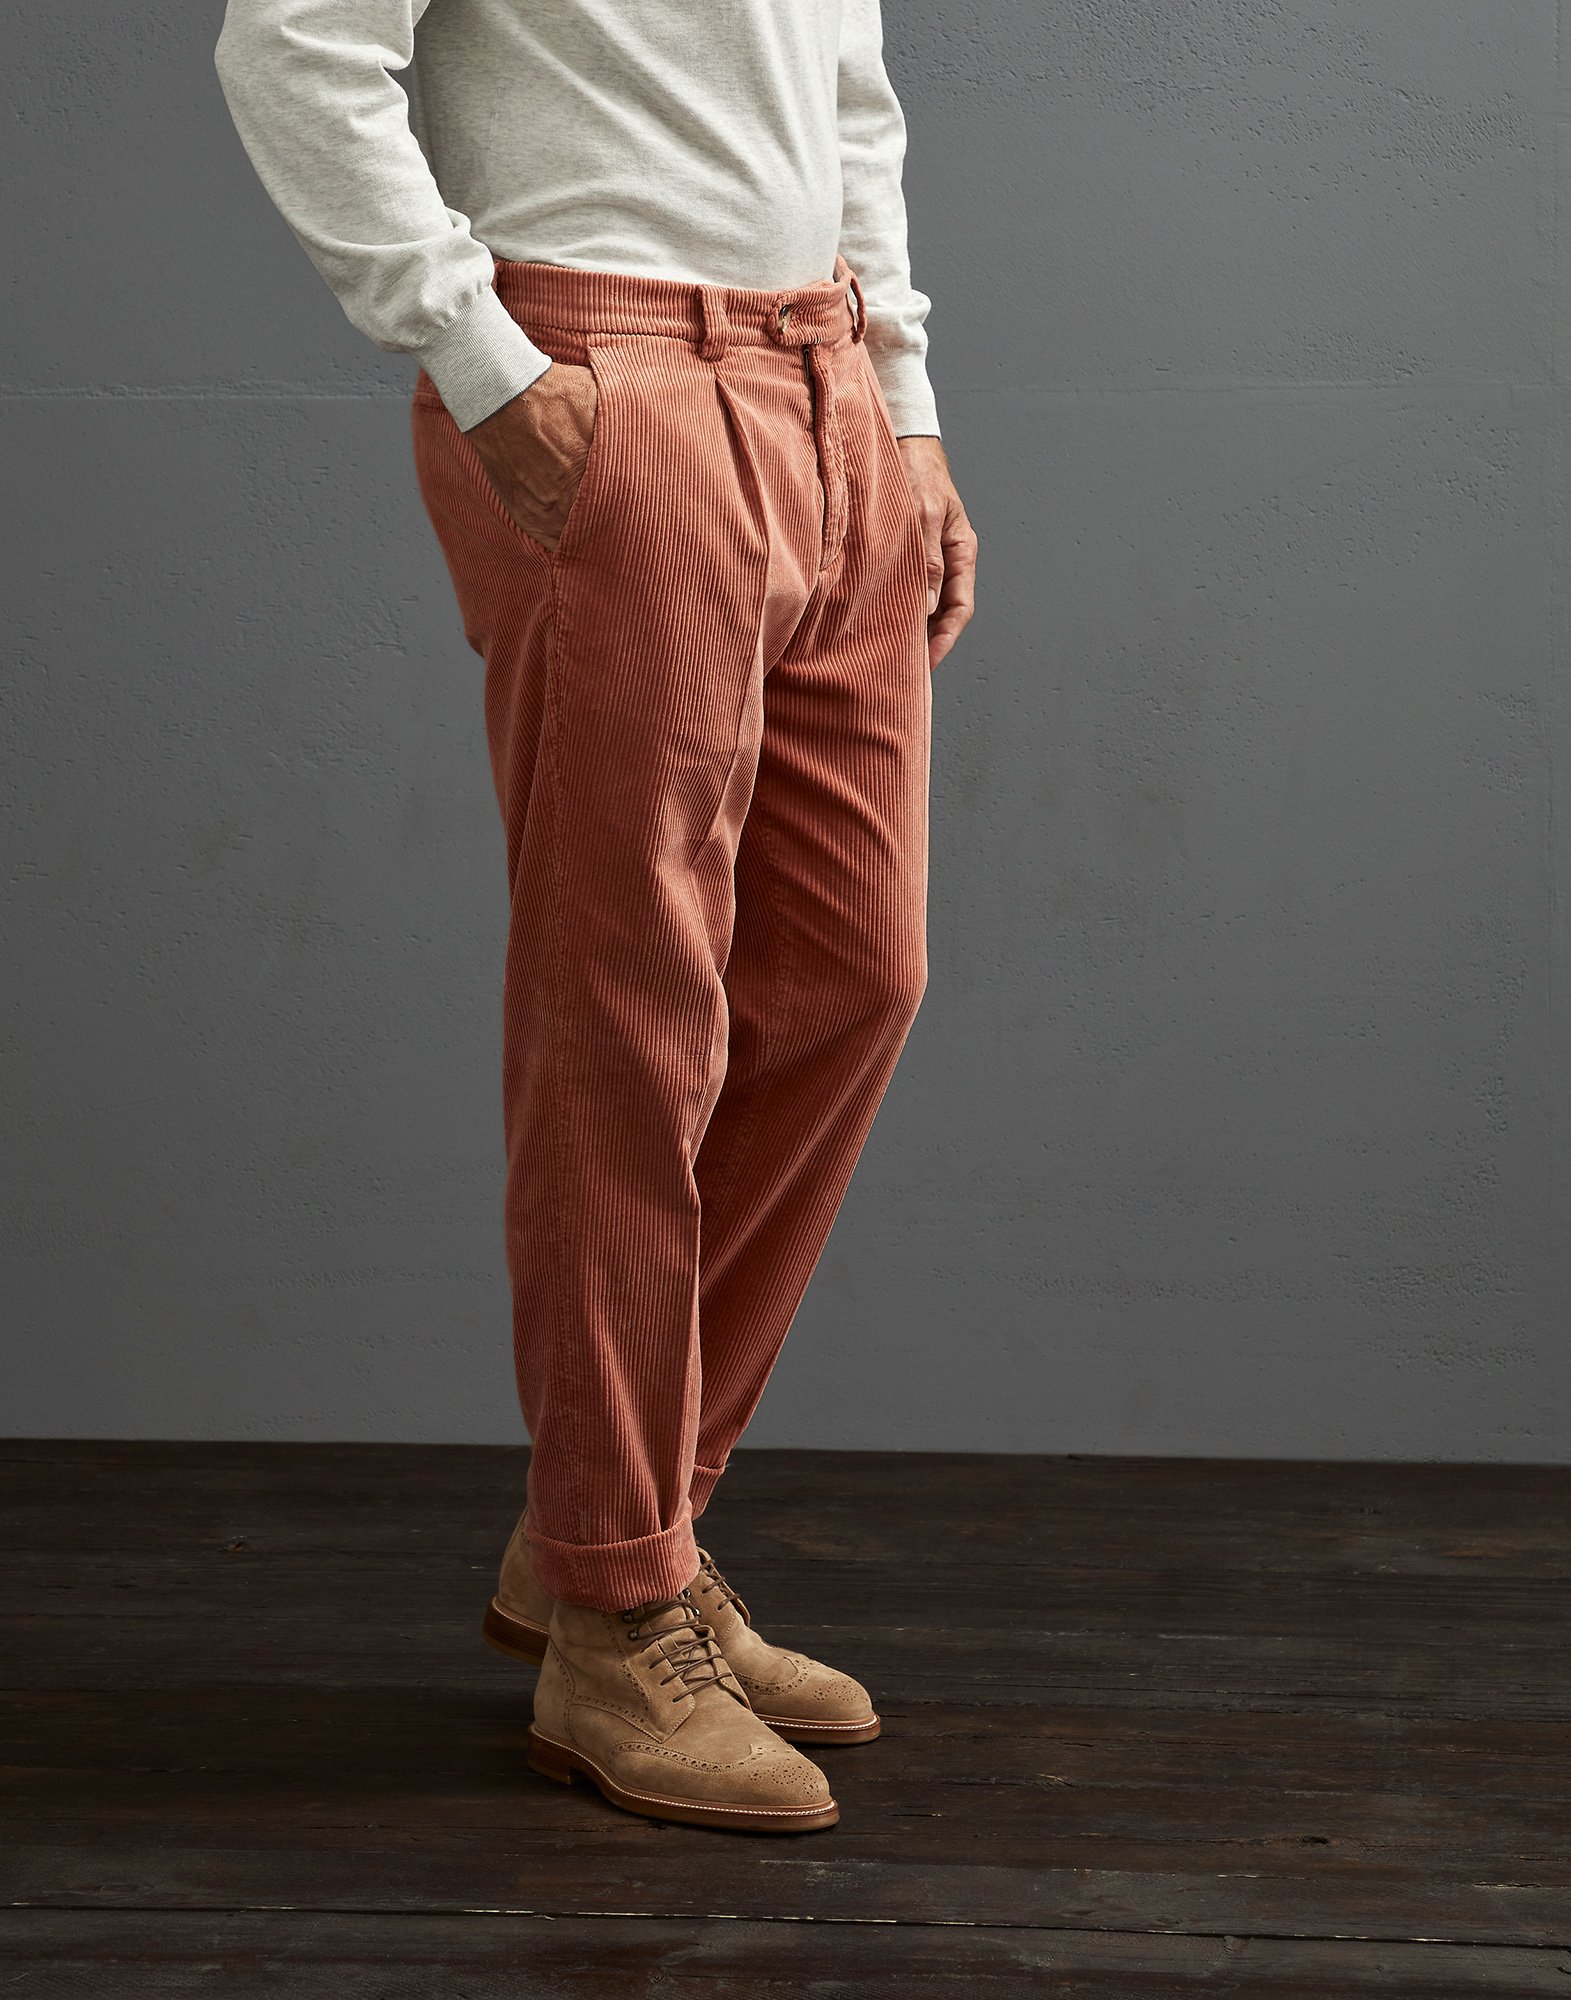 Grey Brunello Cucinelli Checked Wool And Cashmere Pants in Beige Slacks and Chinos Brunello Cucinelli Trousers Slacks and Chinos Womens Trousers 